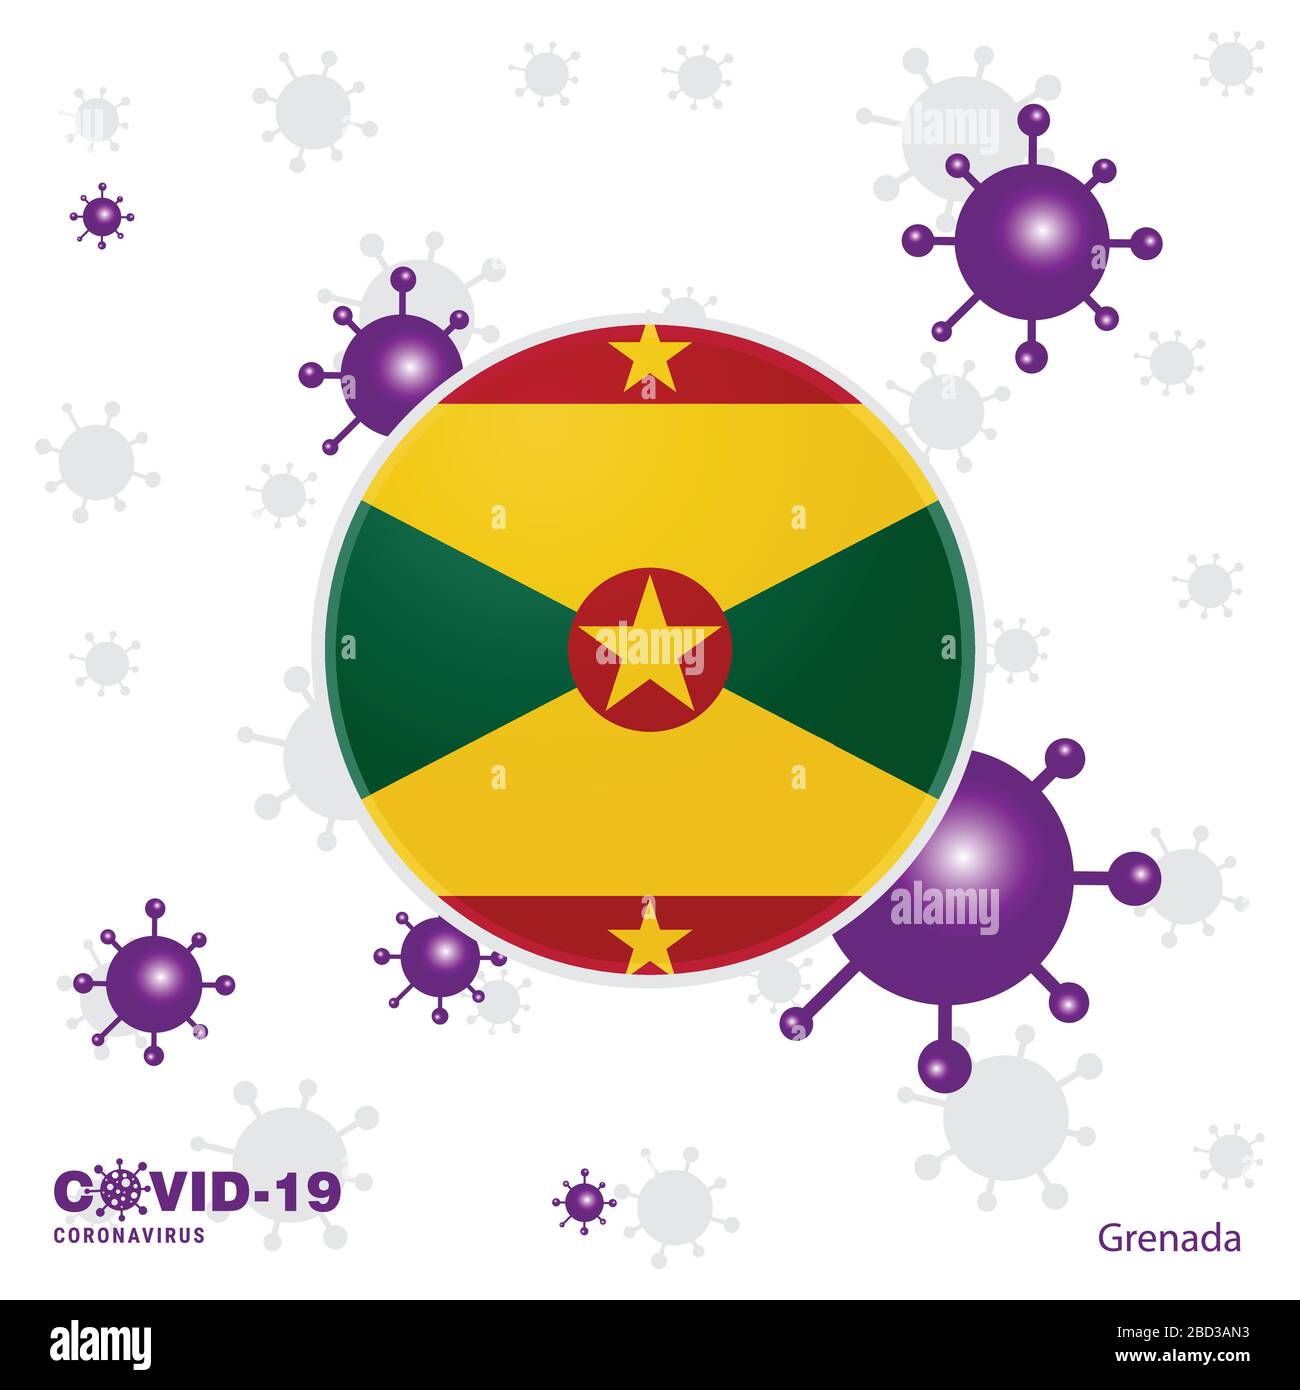 Pray For Grenada. COVID-19 Coronavirus Typography Flag. Stay home, Stay Healthy. Take care of your own health Stock Vector